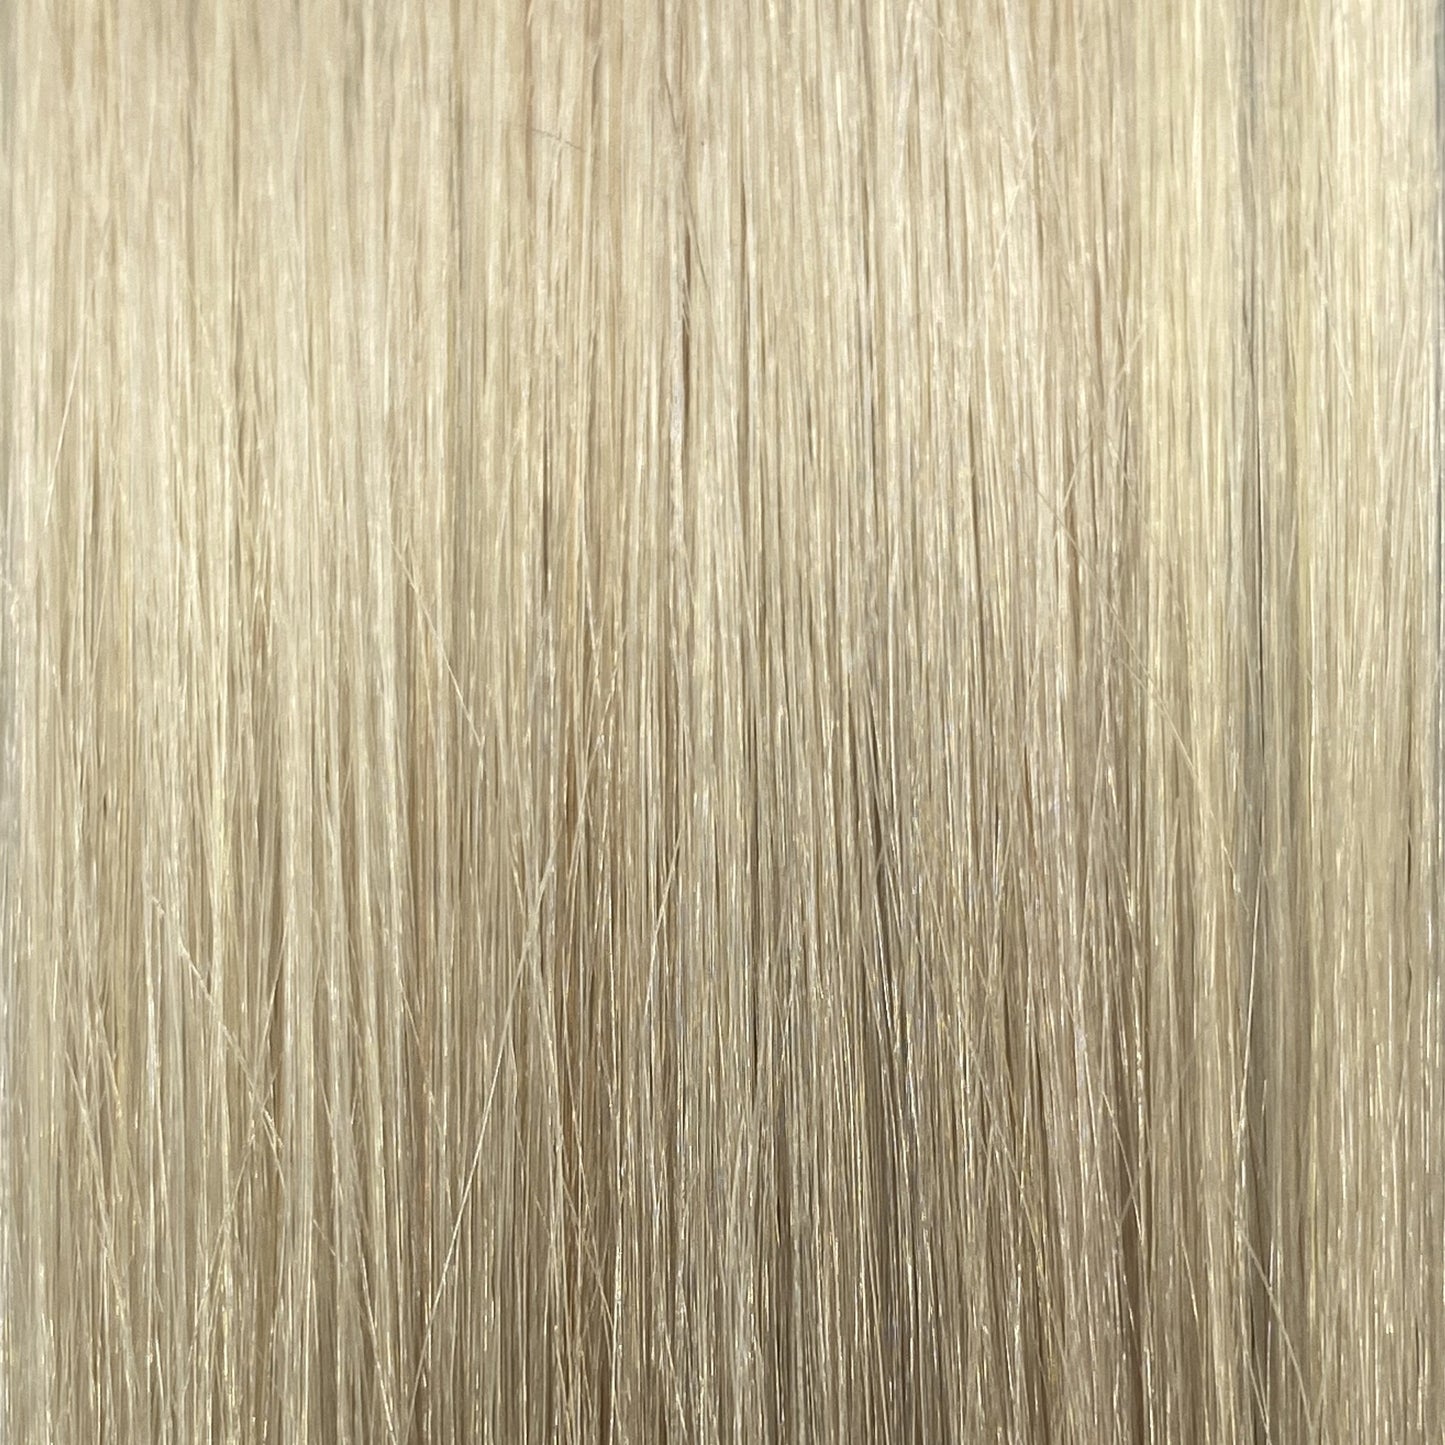 Fusion hair extensions #1004 - 40cm/16 inches - Ultra Very Light Platinum Blonde Fusion 